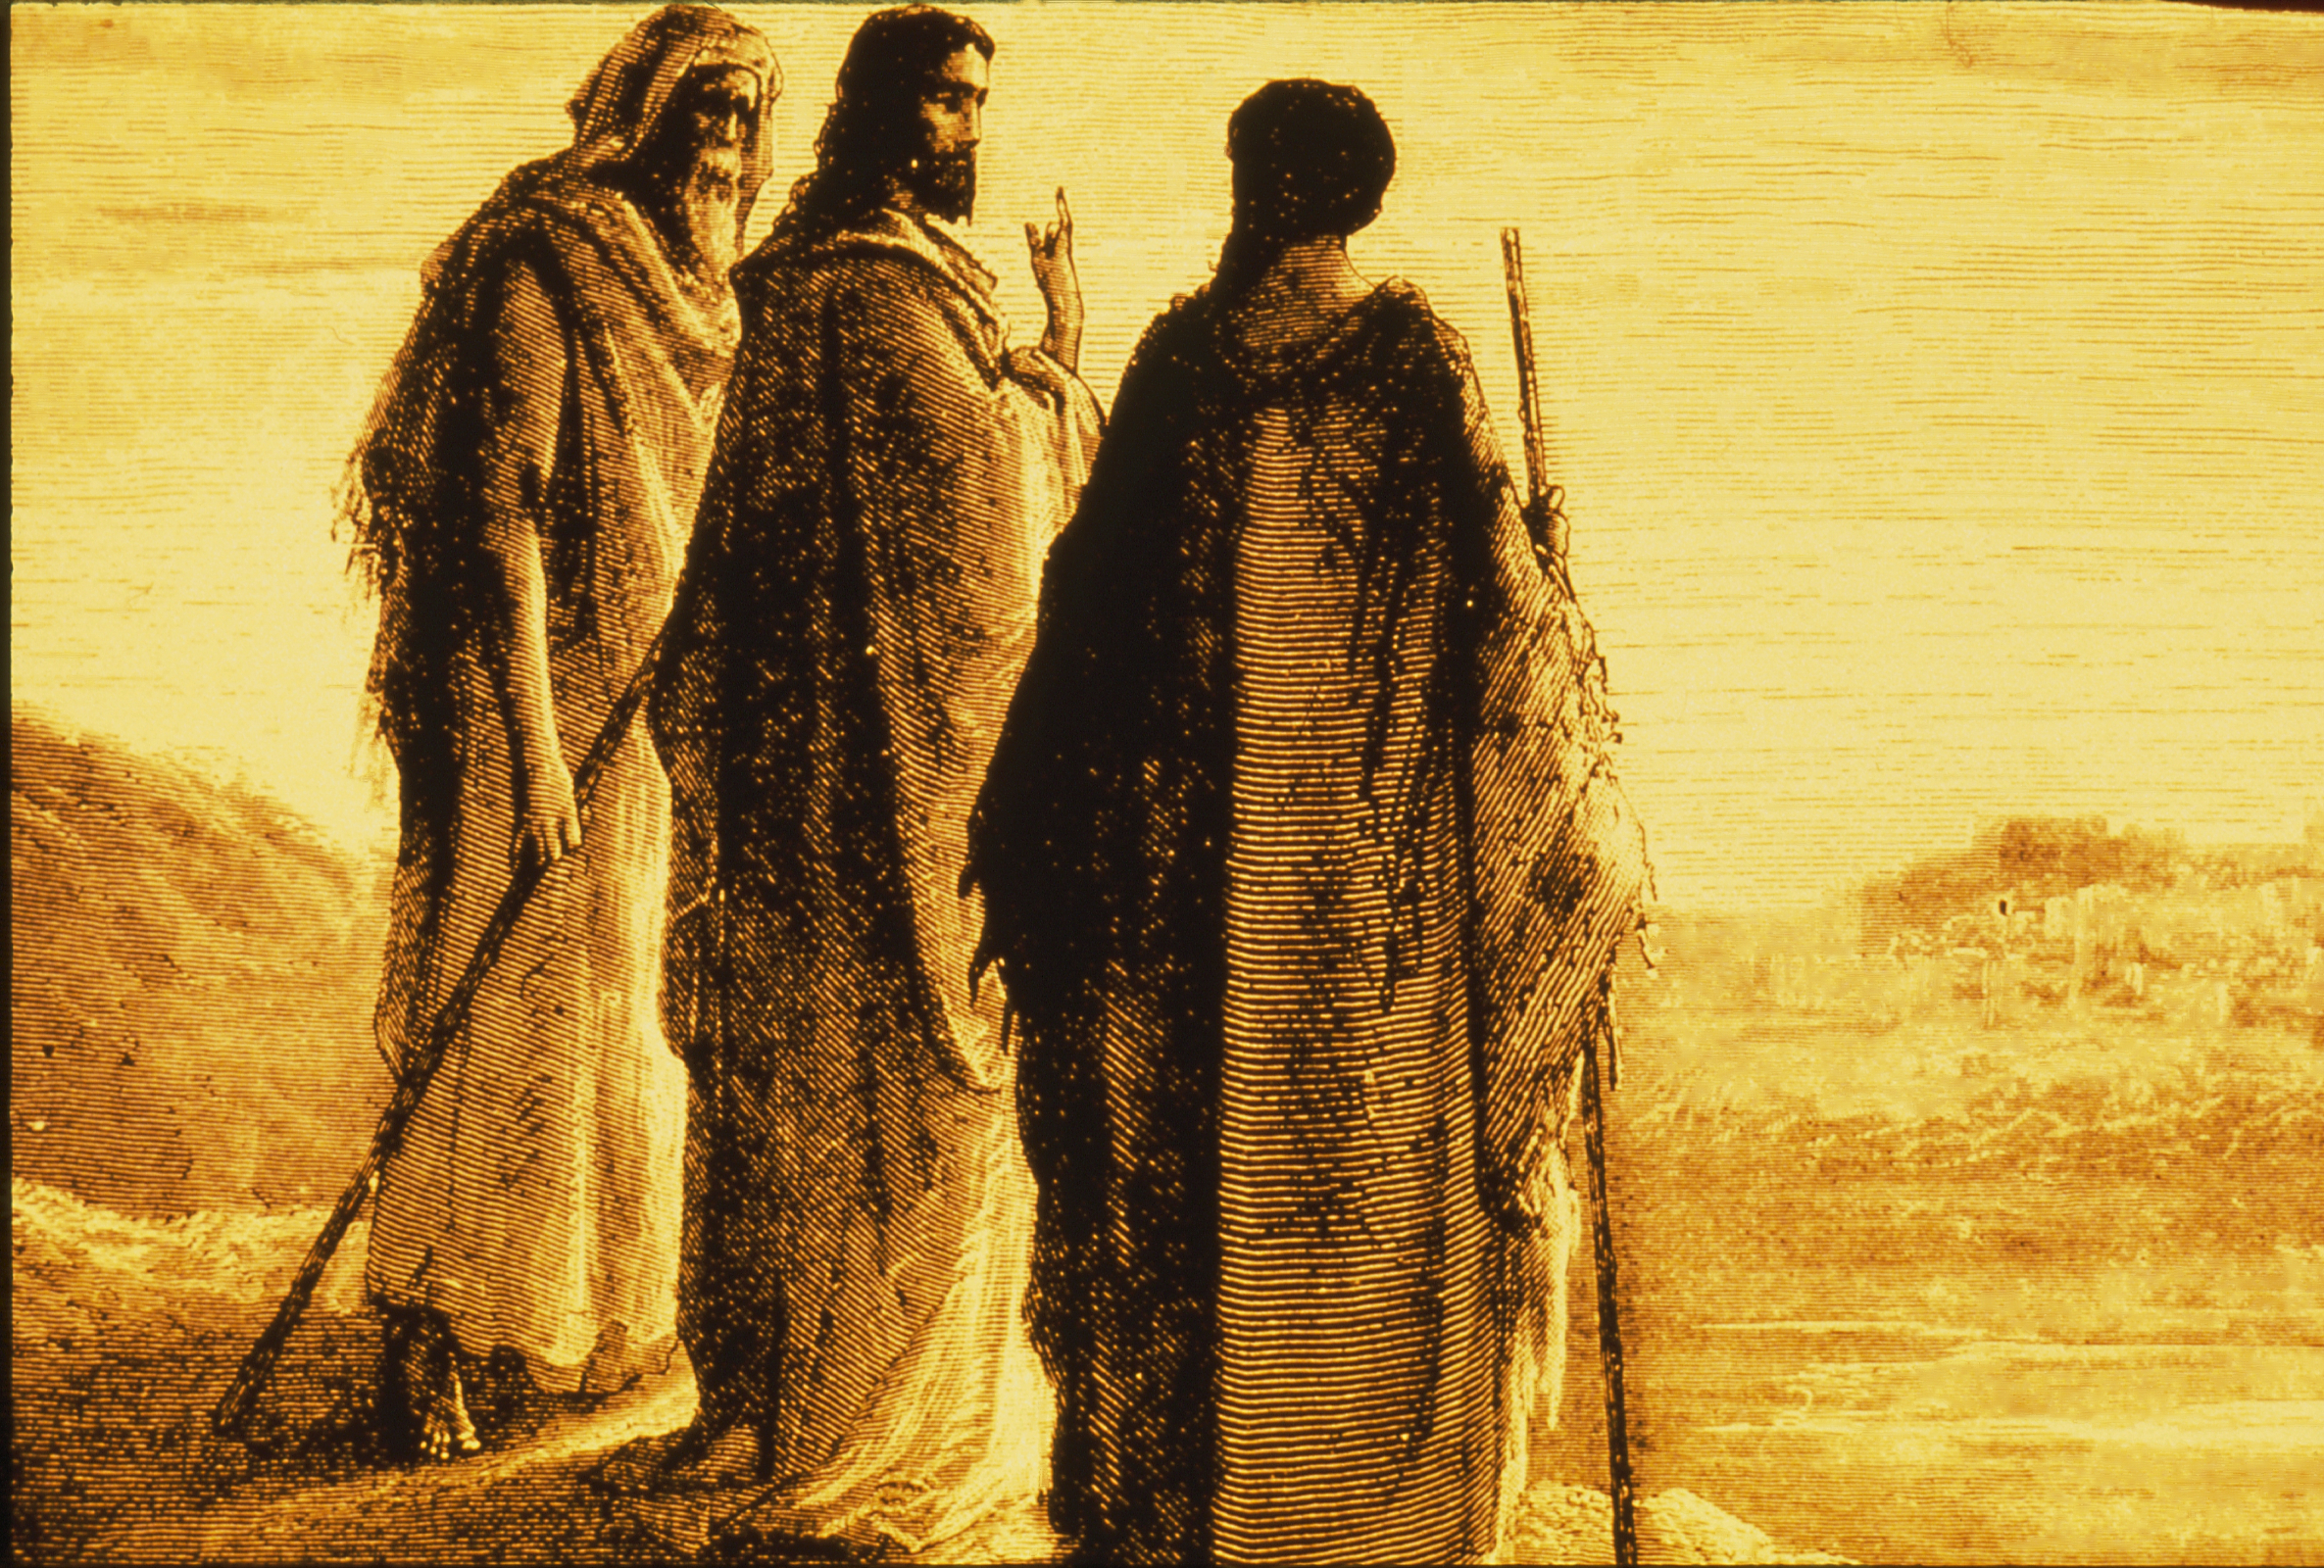 Jesus and the Disciples Going to Emmaus2371 x 1600